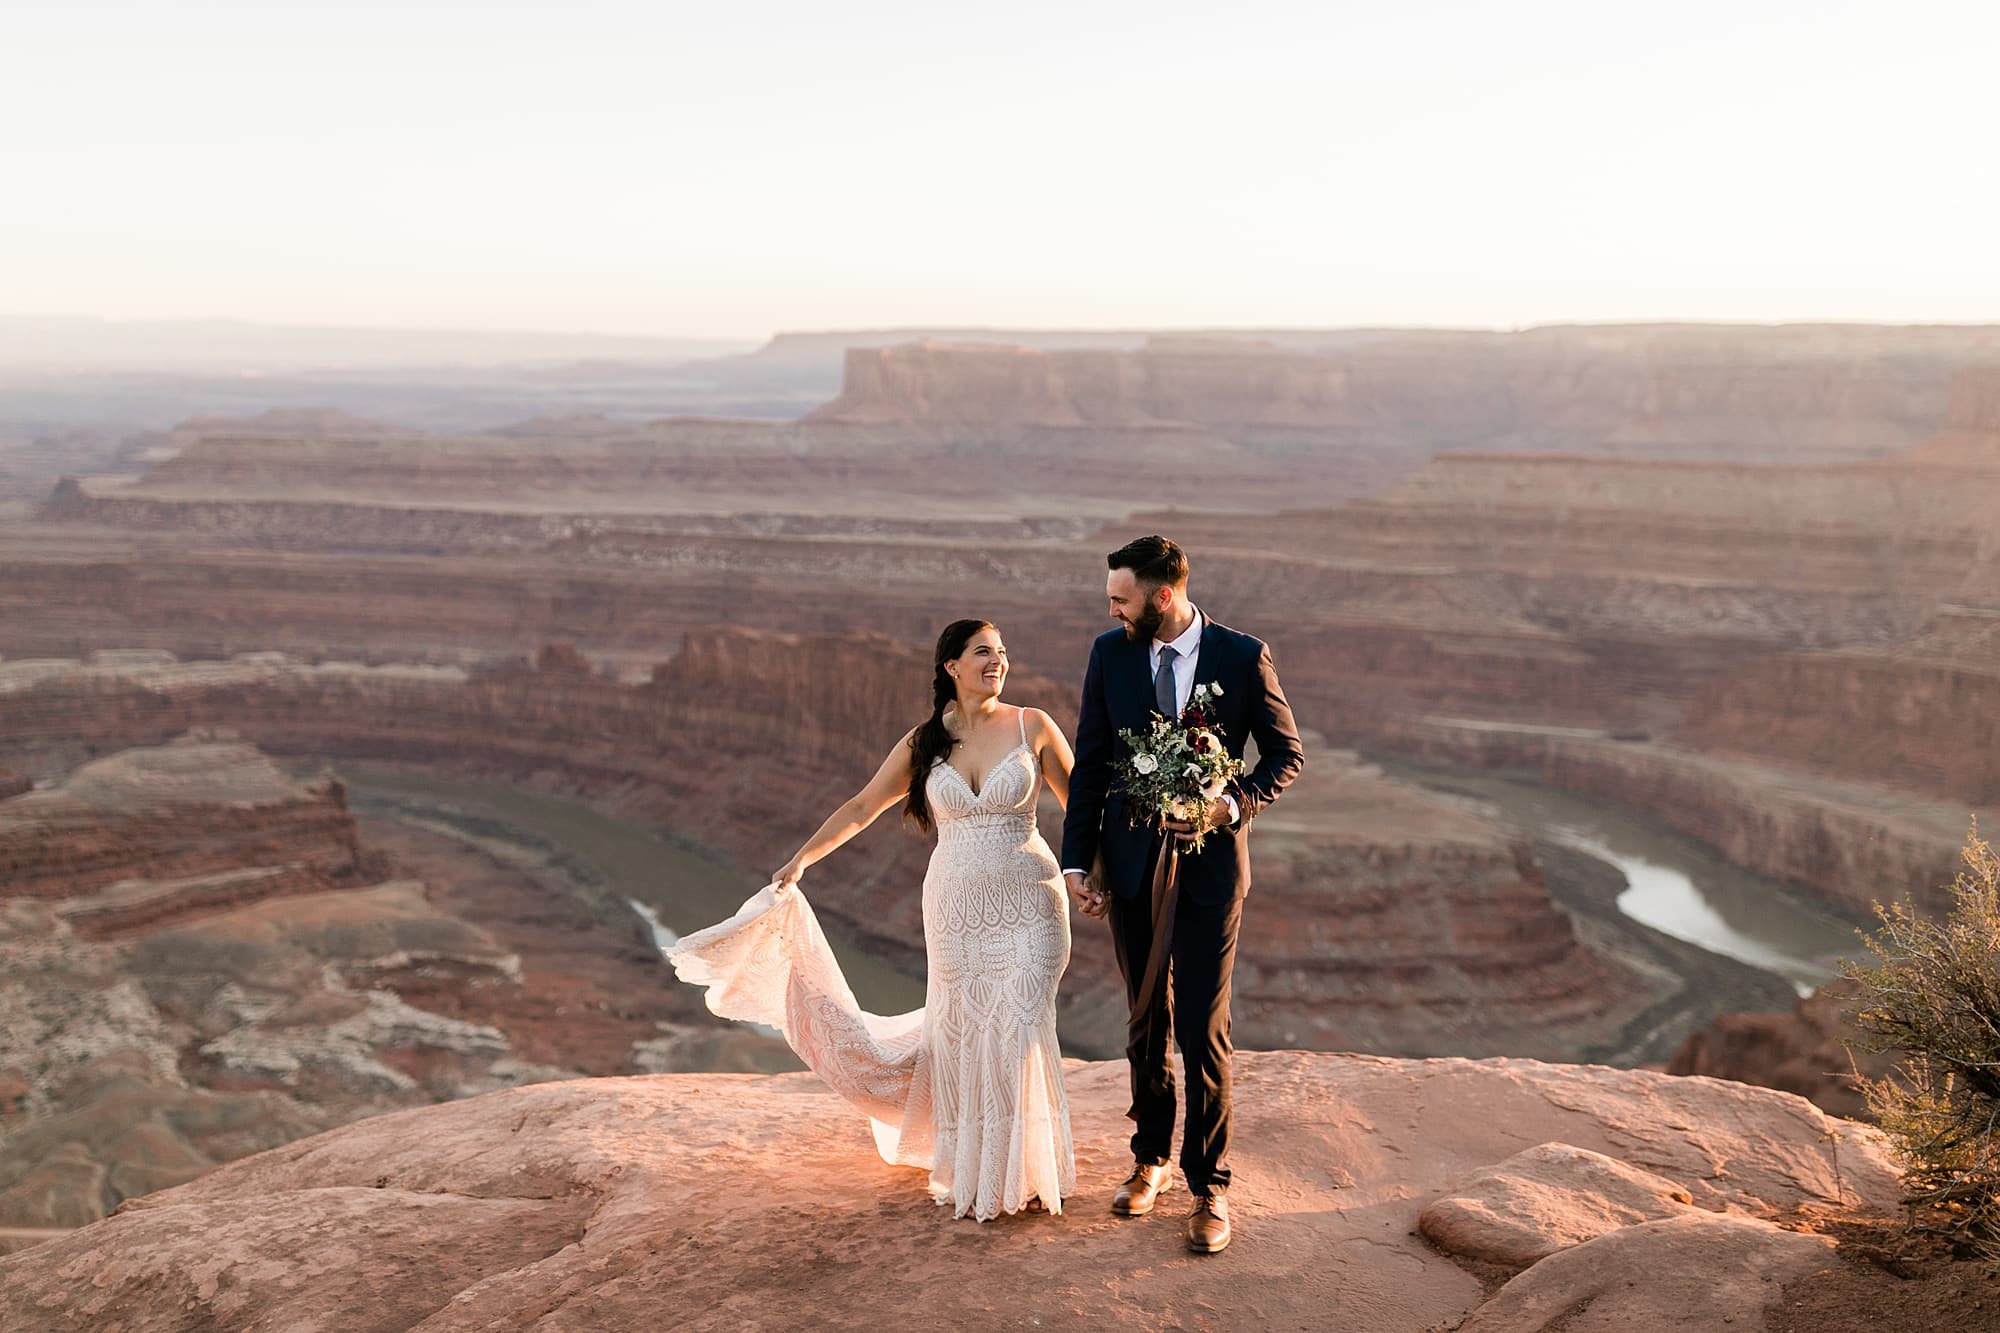 A couple in wedding attire stands in front of a Dead Horse Point Overlook.